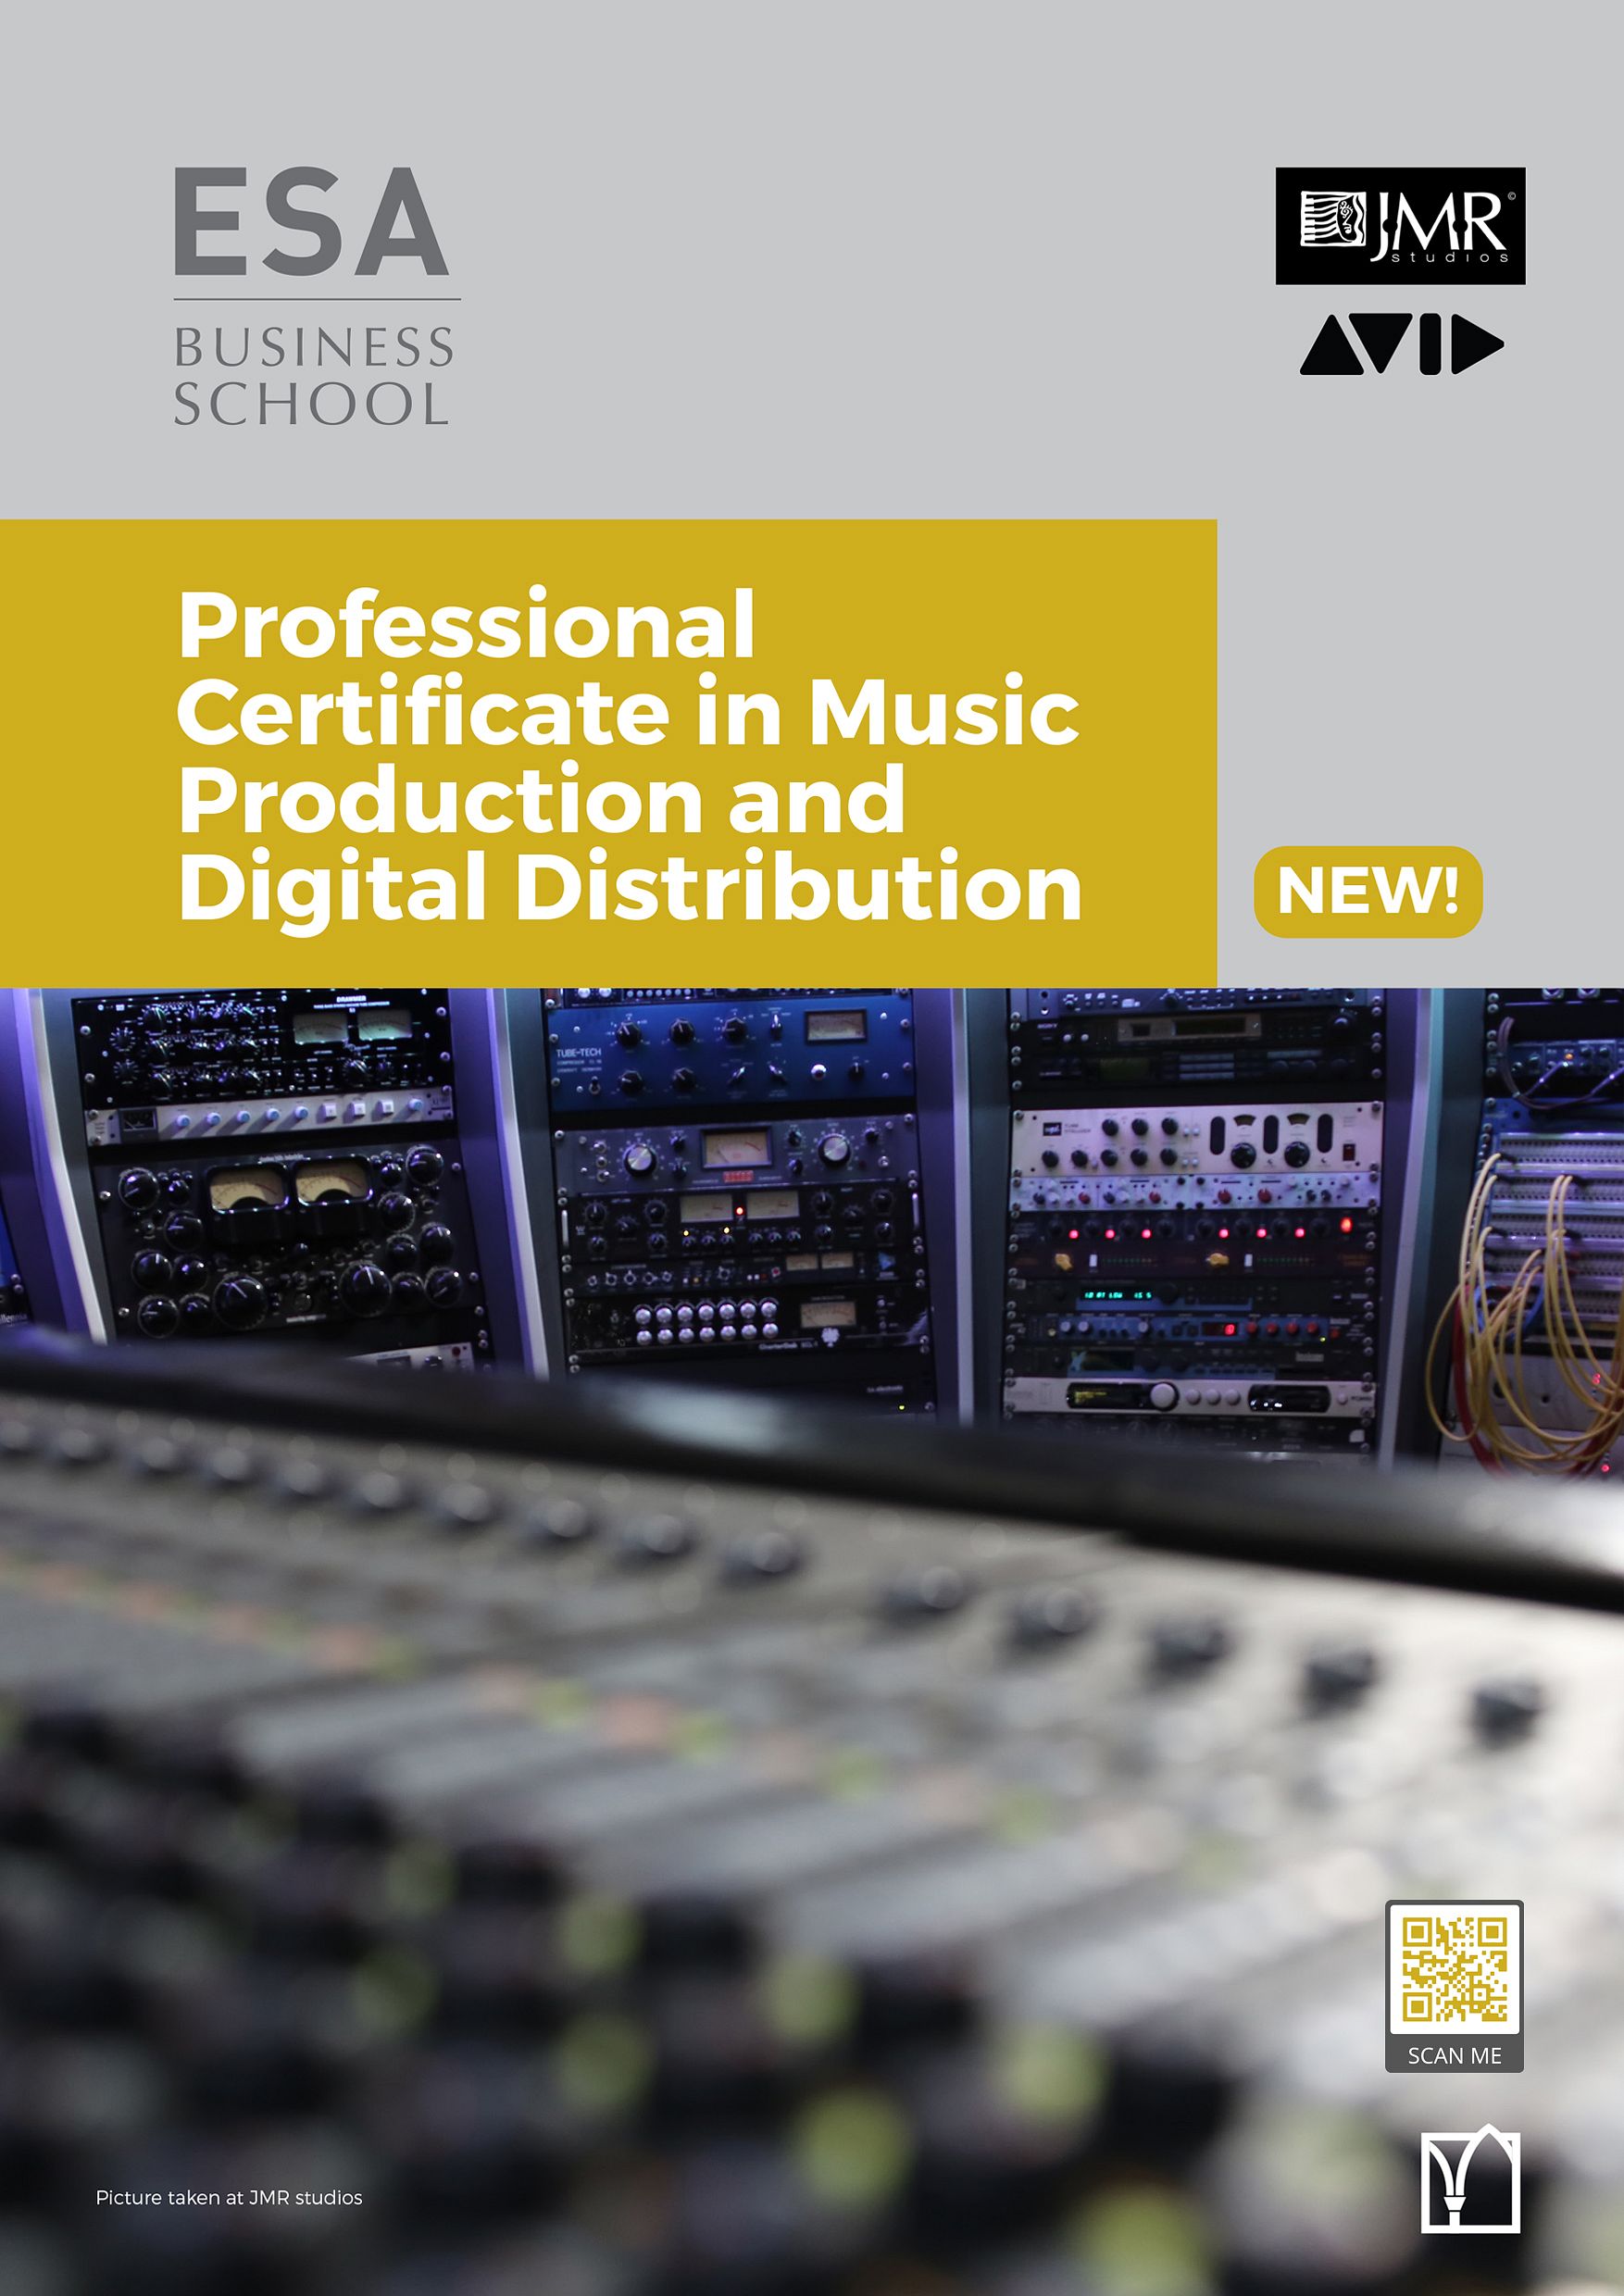 PROFESSIONAL CERTIFICATE IN MUSIC PRODUCTION AND DIGITAL DISTRIBUTION thumbnail